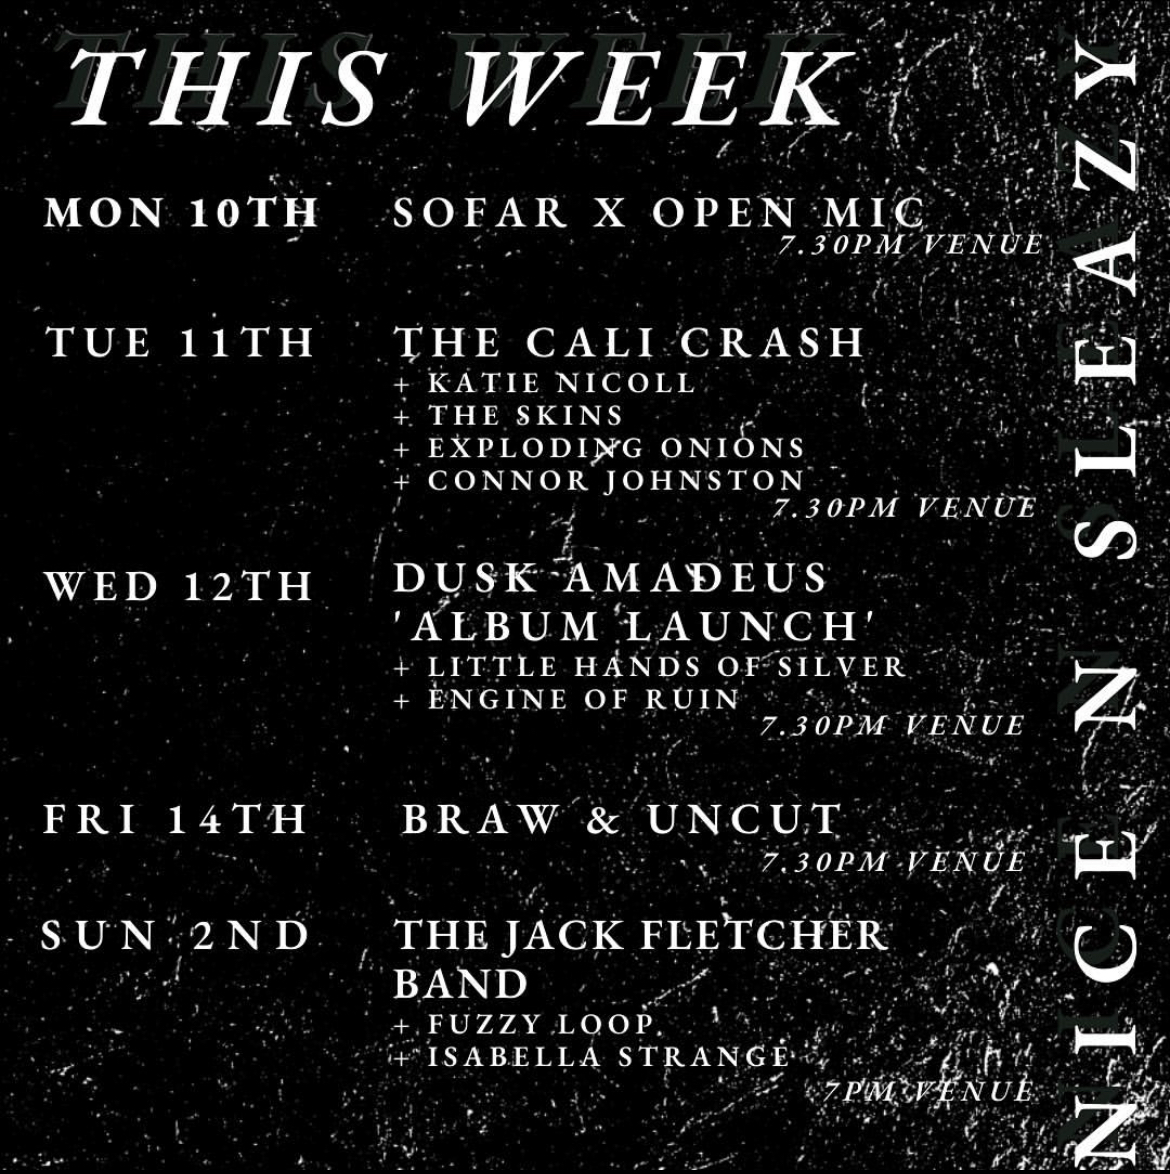 Gigs this week, come check out some great live music!